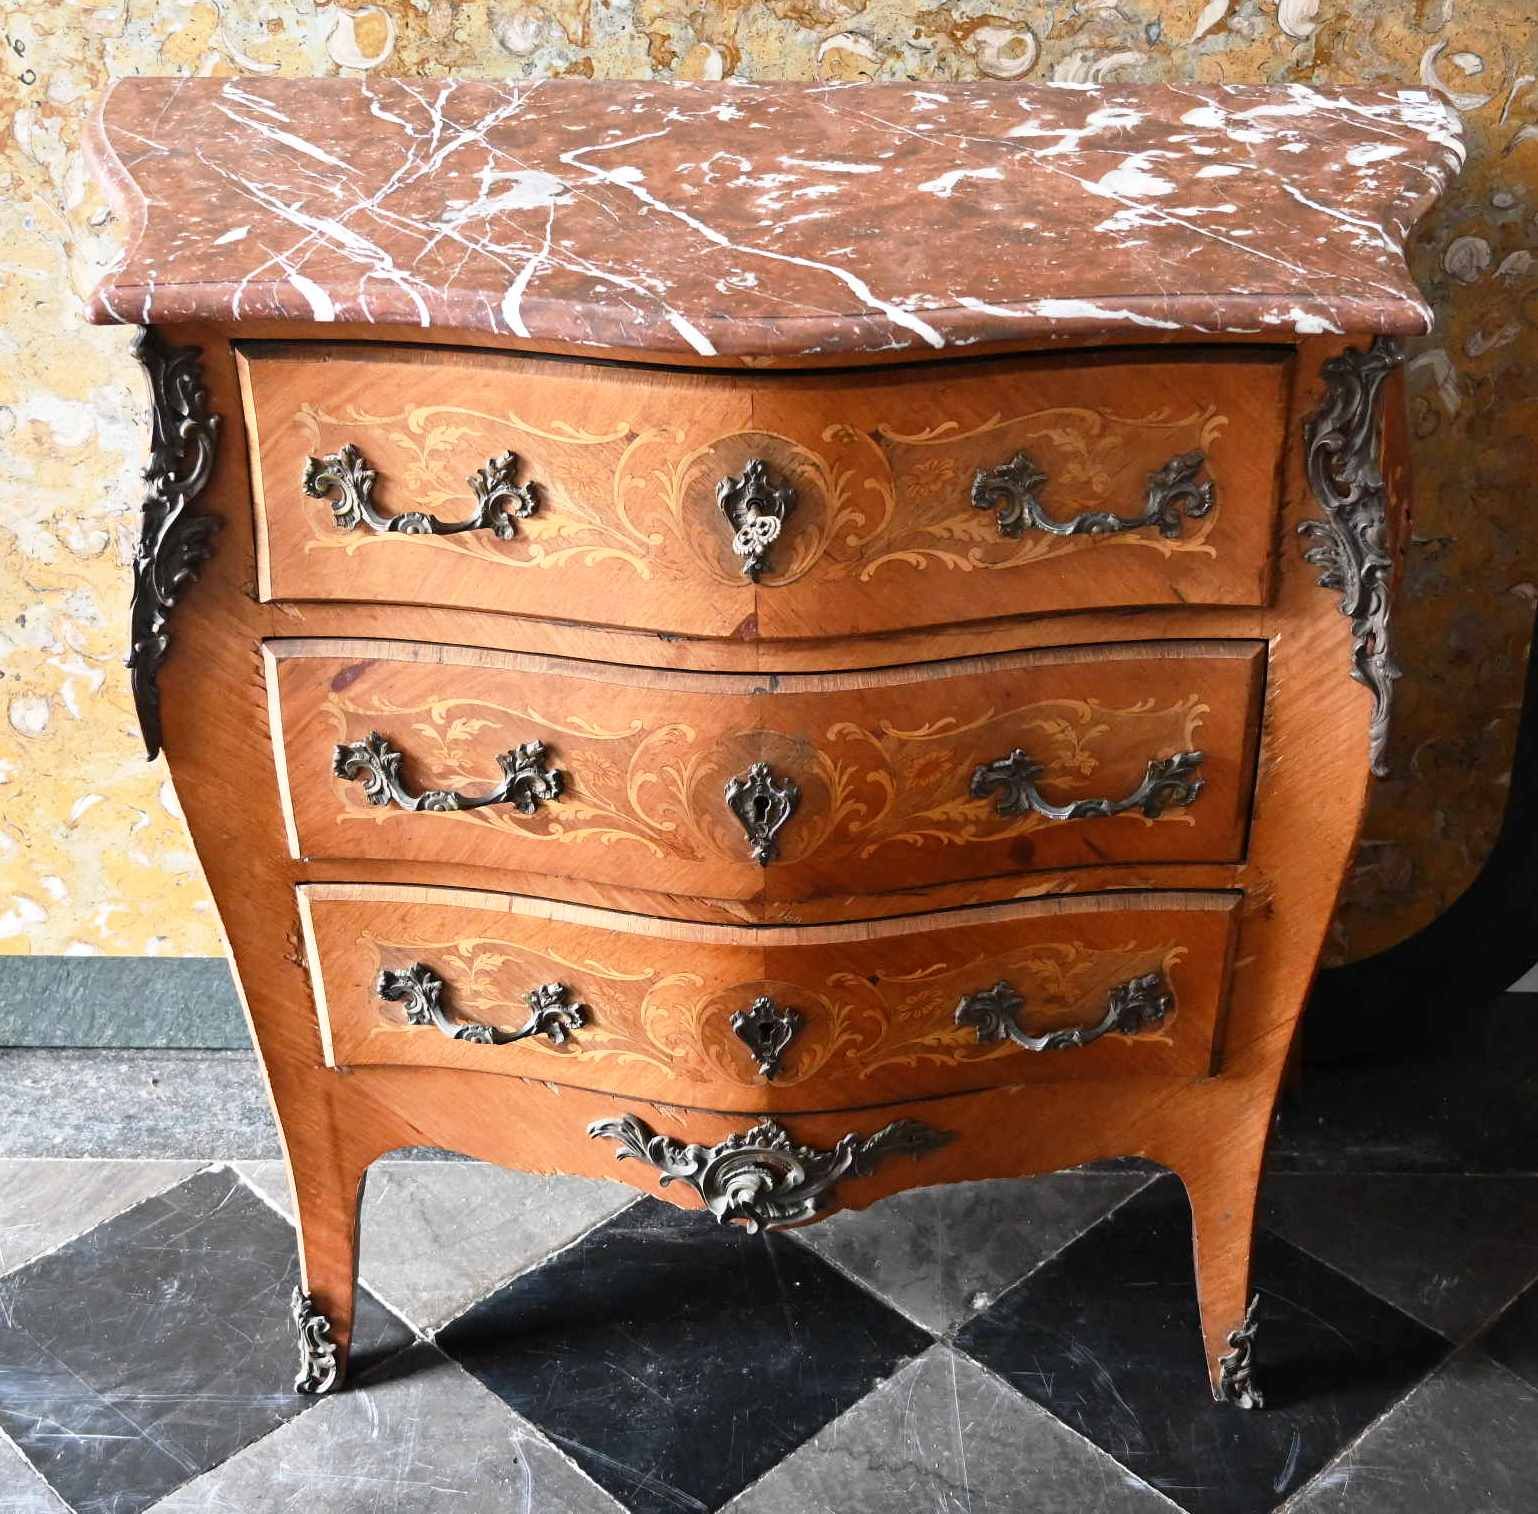 Commode galbée de style Louis XV Louis XV style curved chest of drawers in marqu&hellip;